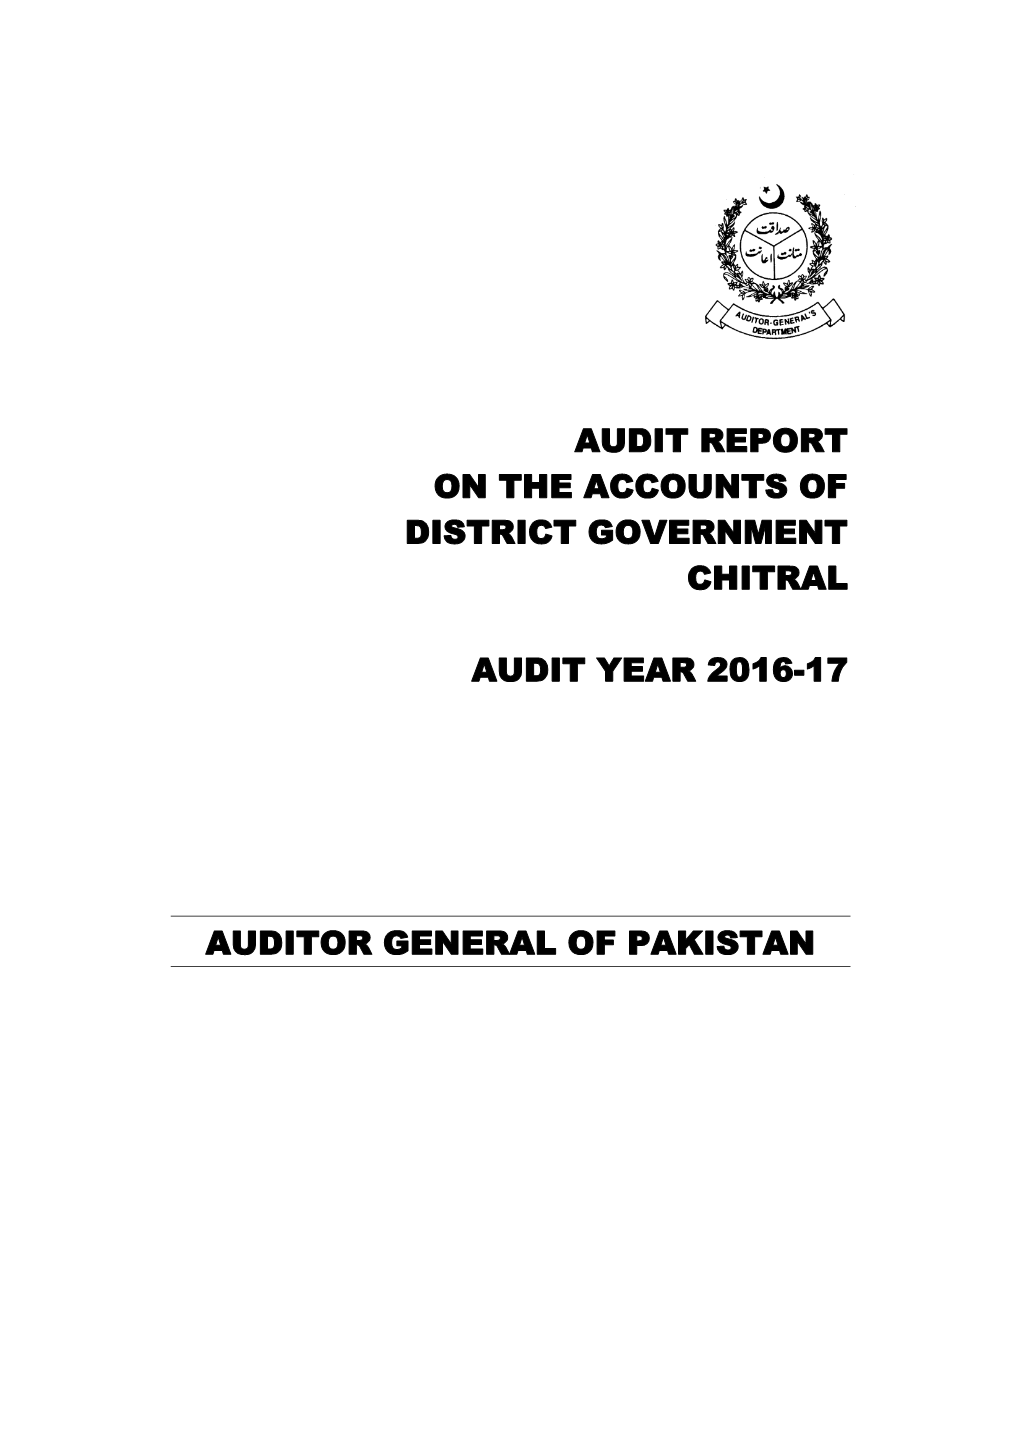 Audit Report on the Accounts of District Government Chitral Audit Year 2016